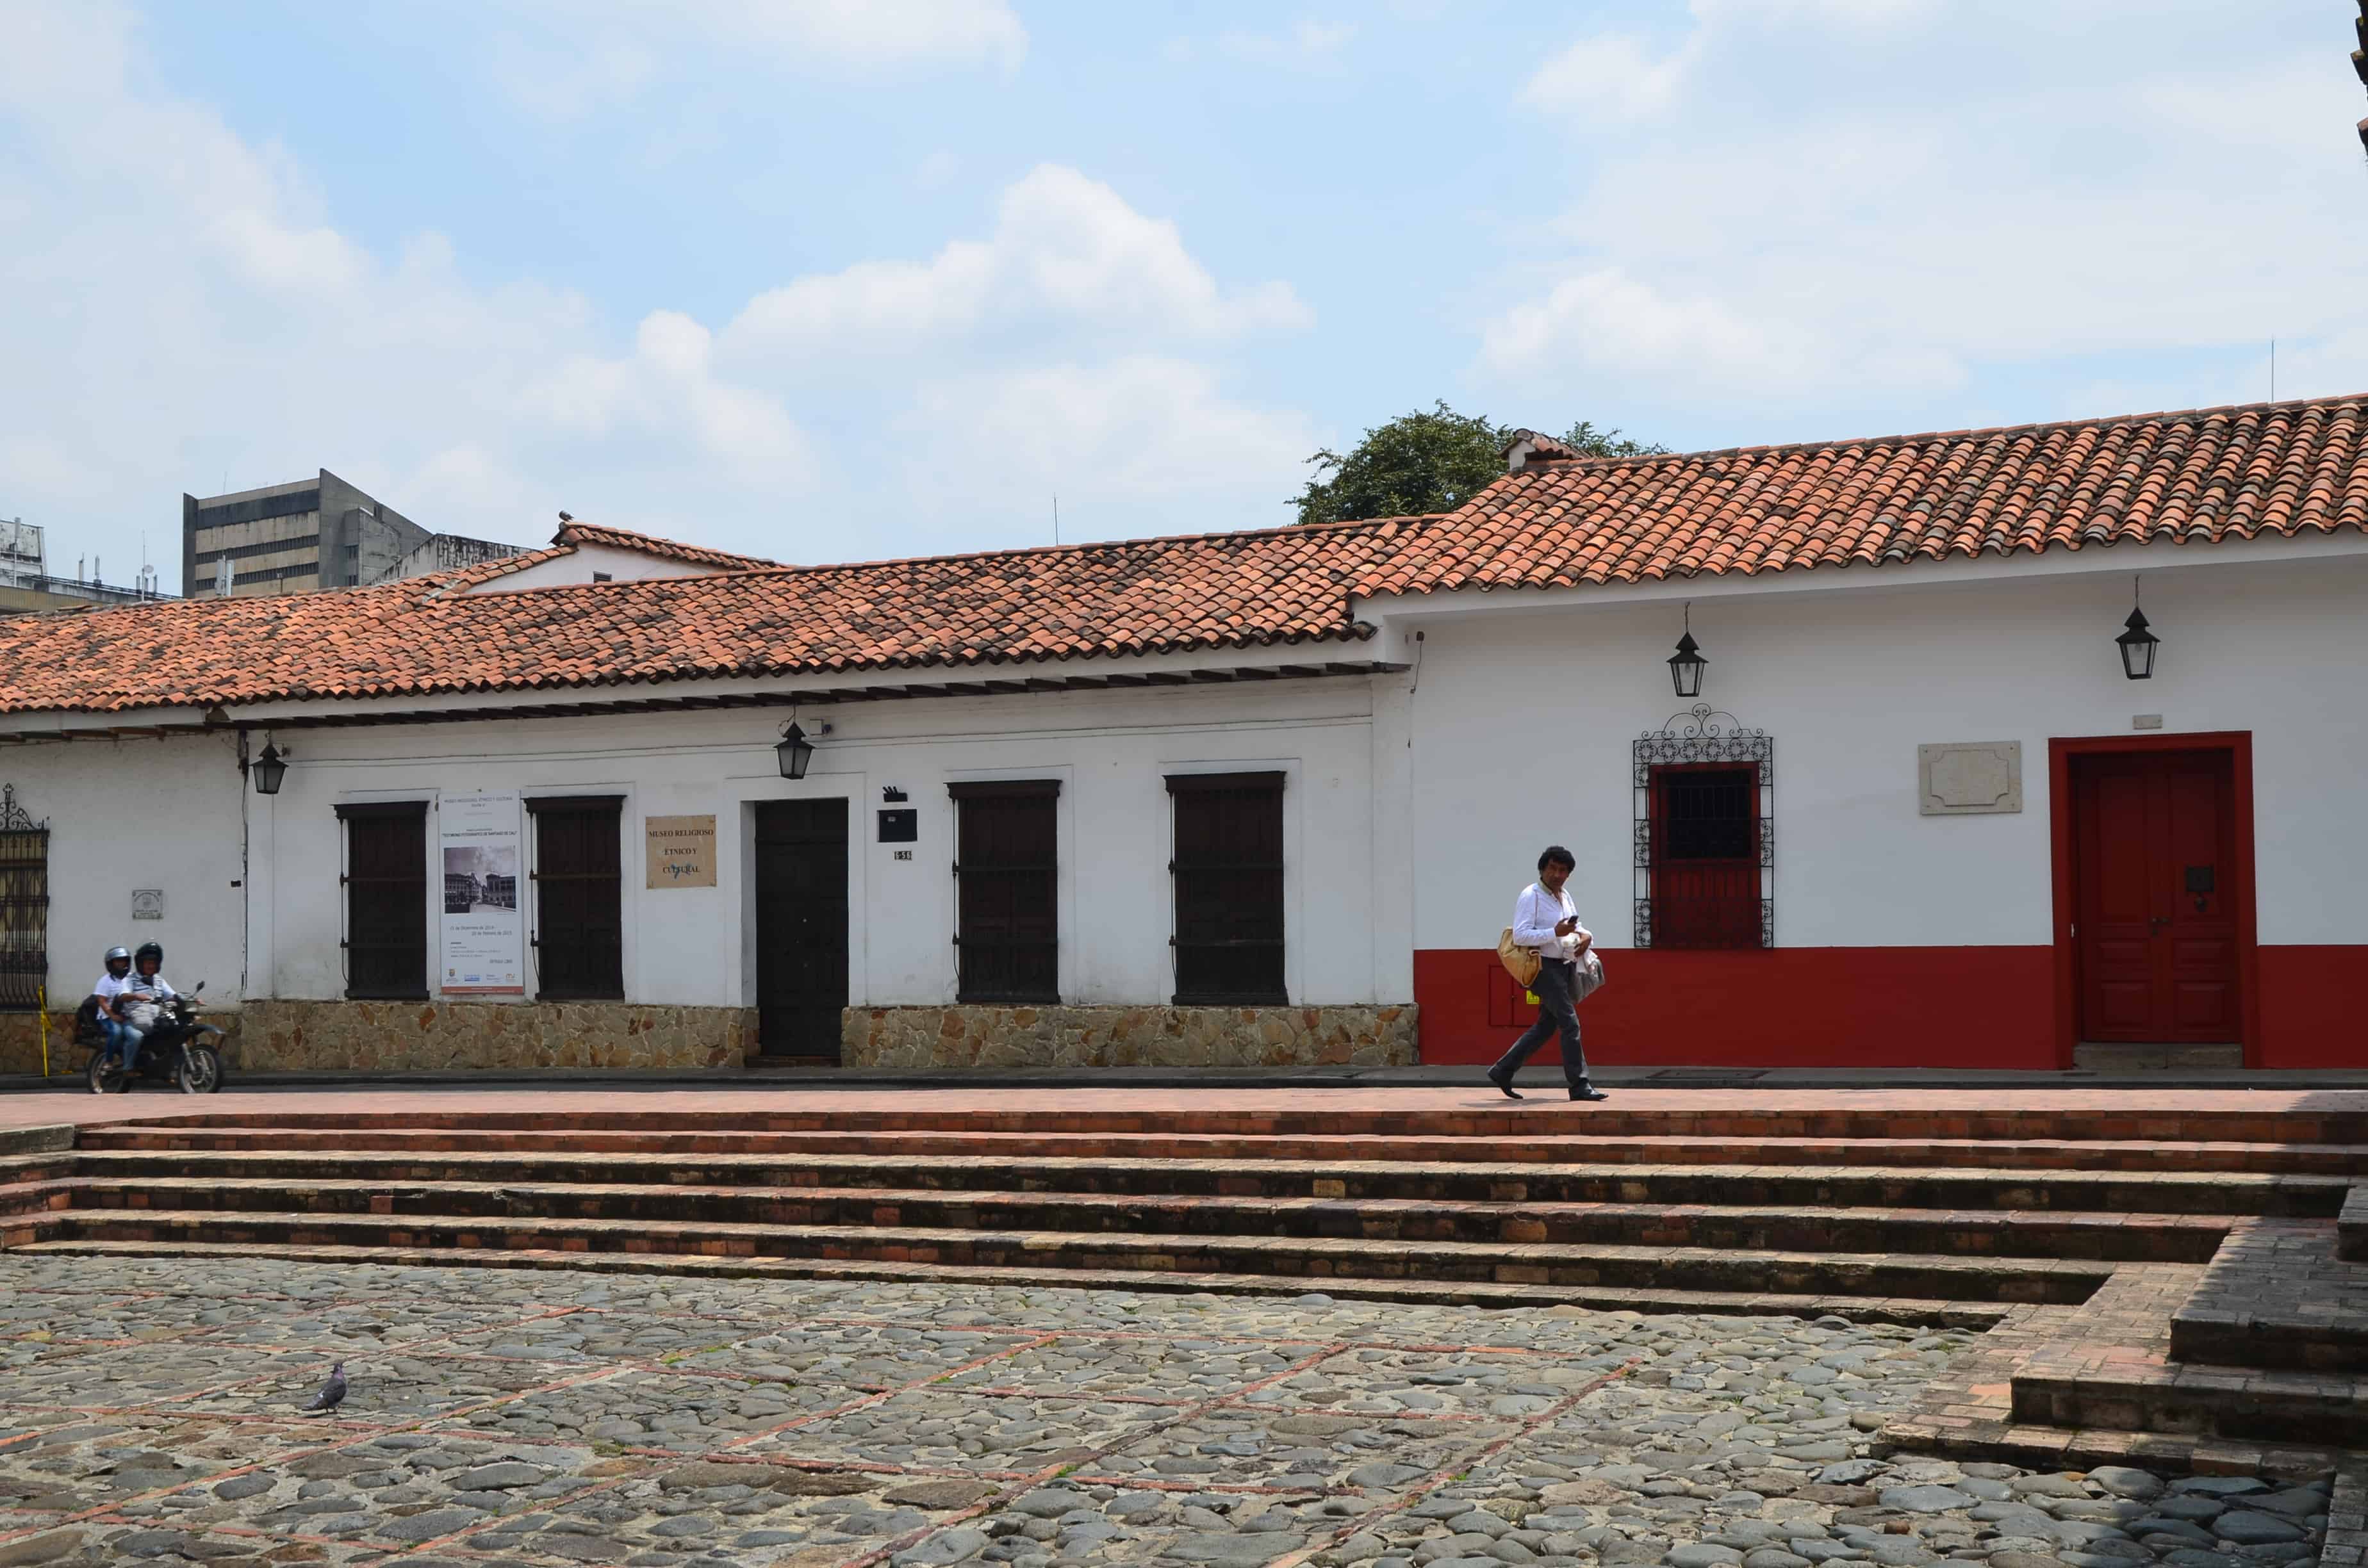 House of Memories of Conflict and Reconciliation in Cali, Colombia